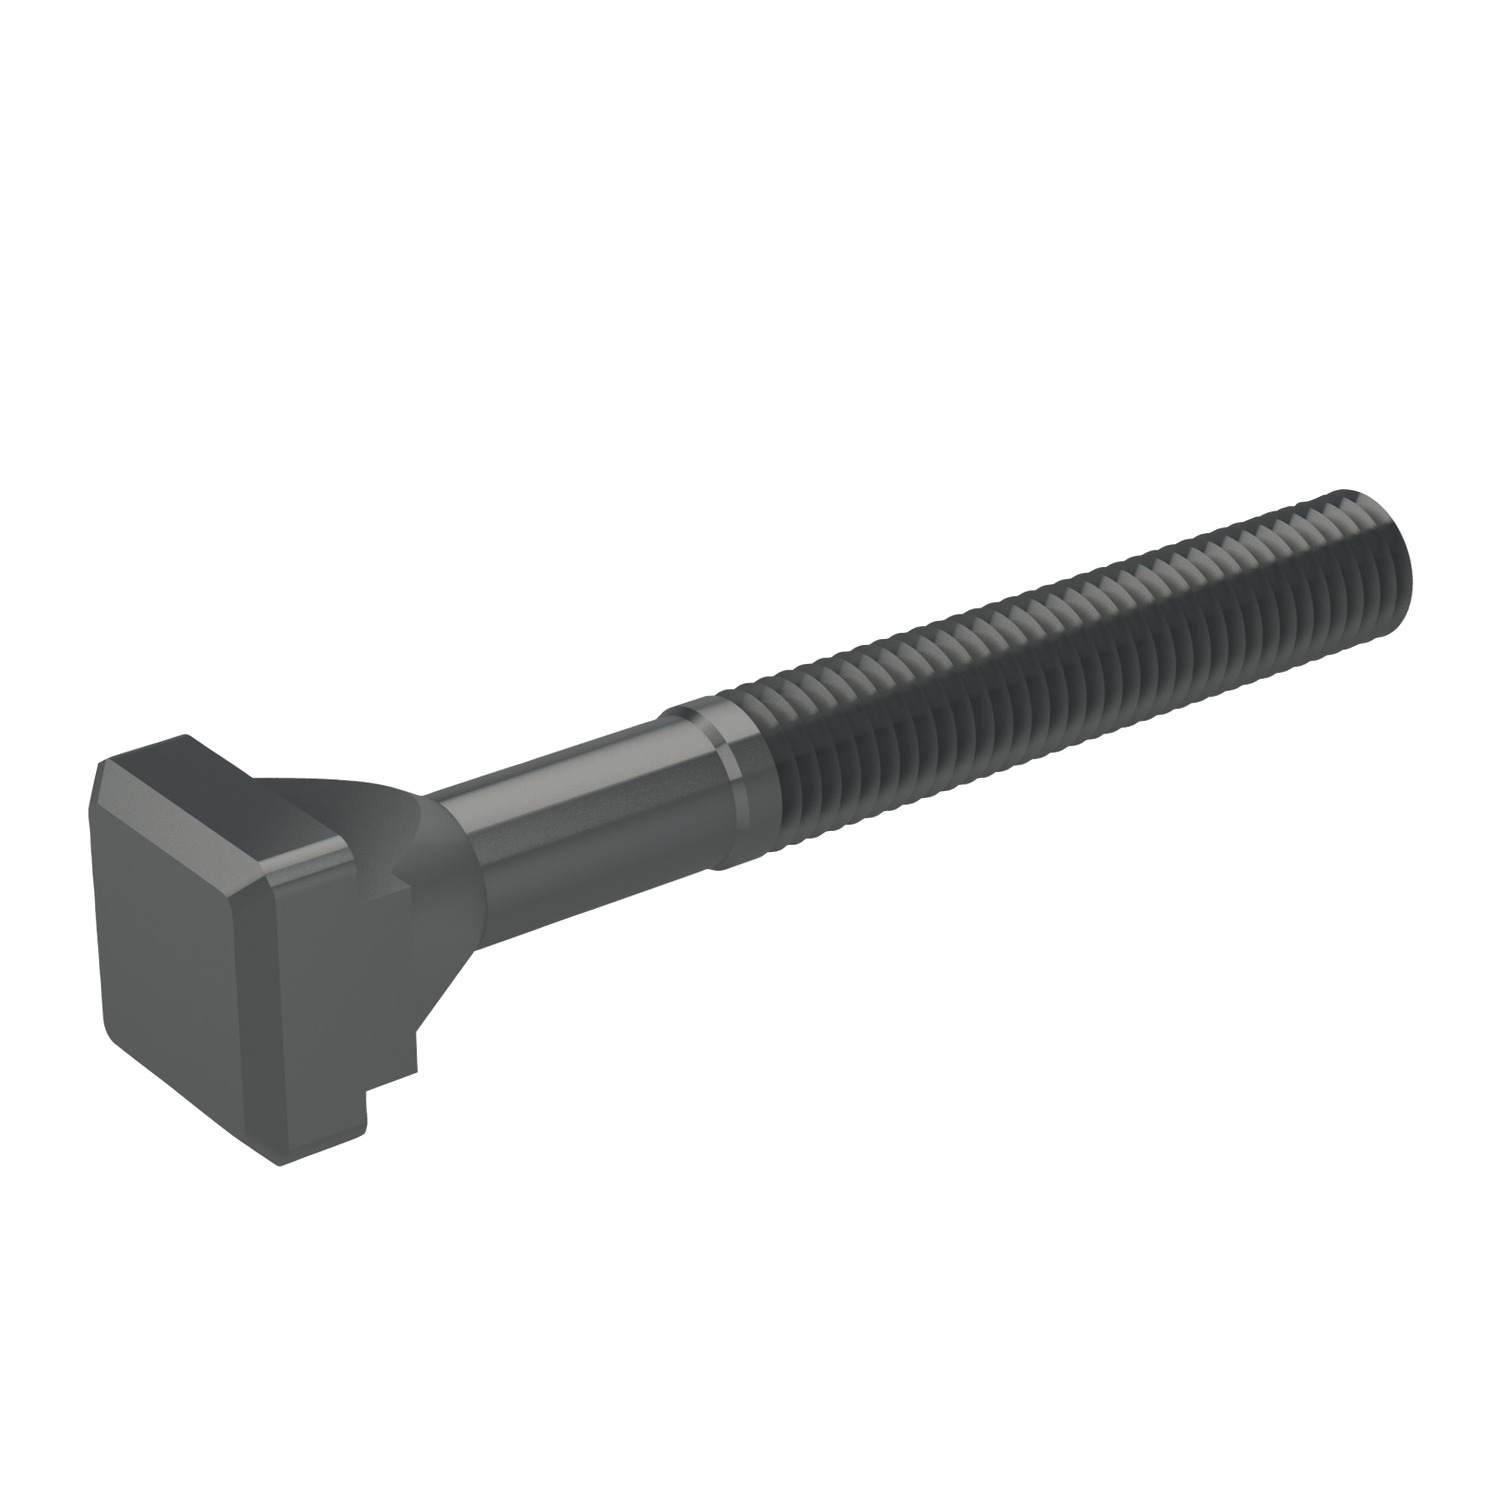 T-Slot Bolts Wixroyd offers two types of t-slot bolts one in strength class 8,8/10 and the extra strength version in 12,9 class steel.